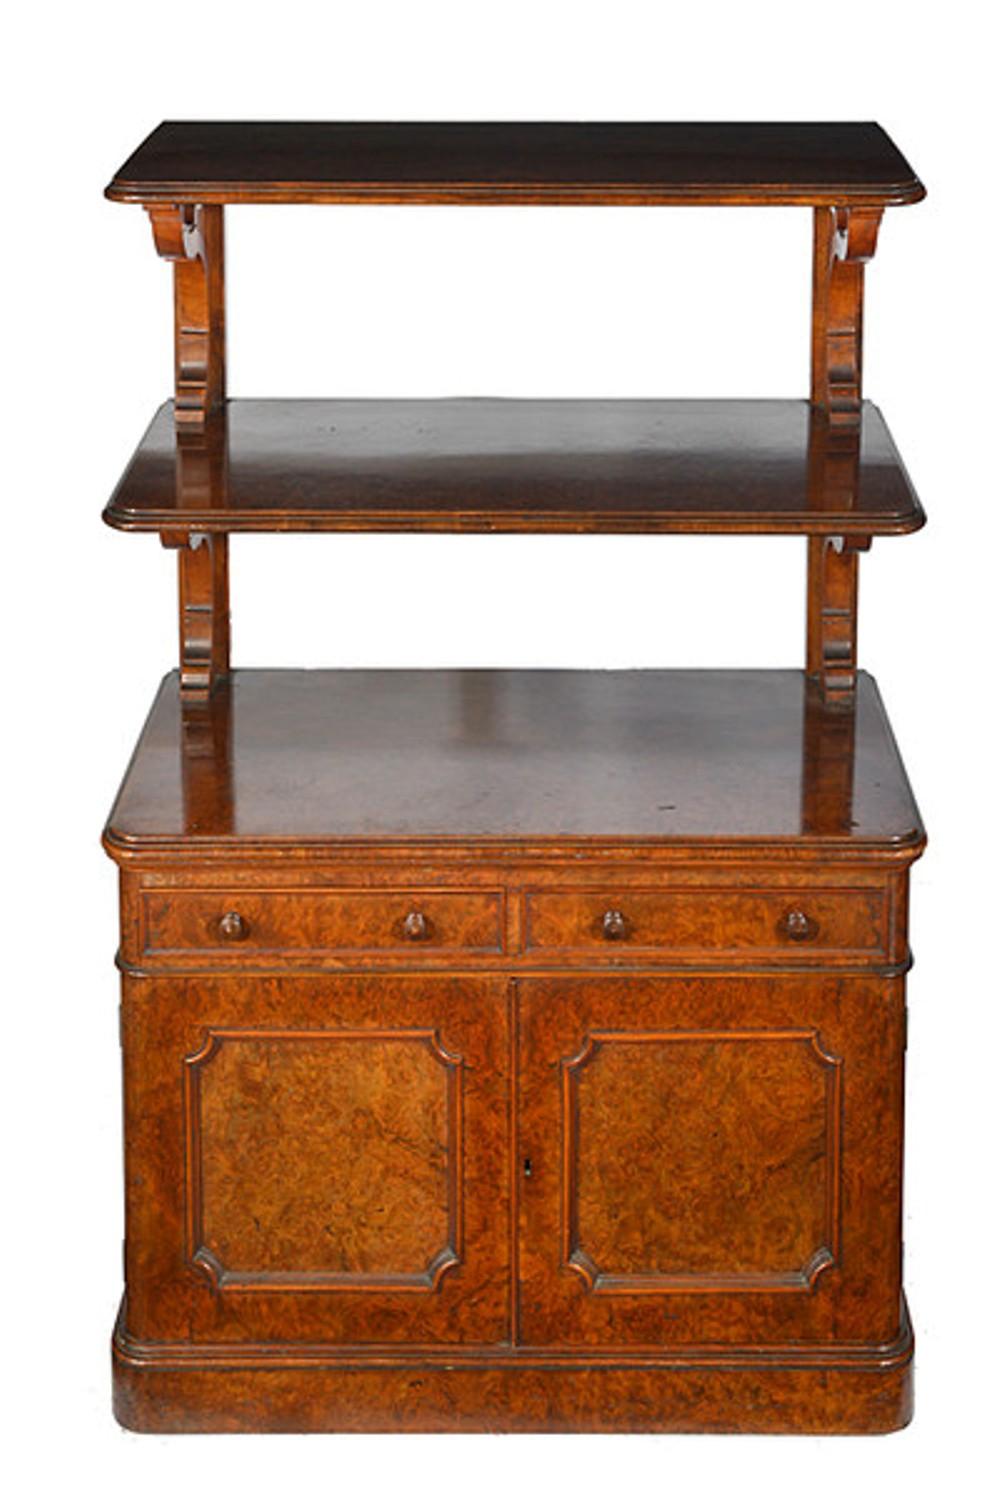 A late Victorian burr walnut cabinet with a pair of useful raised stands to the top.
The base with two drawers and a pair of panel doors below which open to reveal a lead lined celleret to one side and a single shelf to the other.
The whole